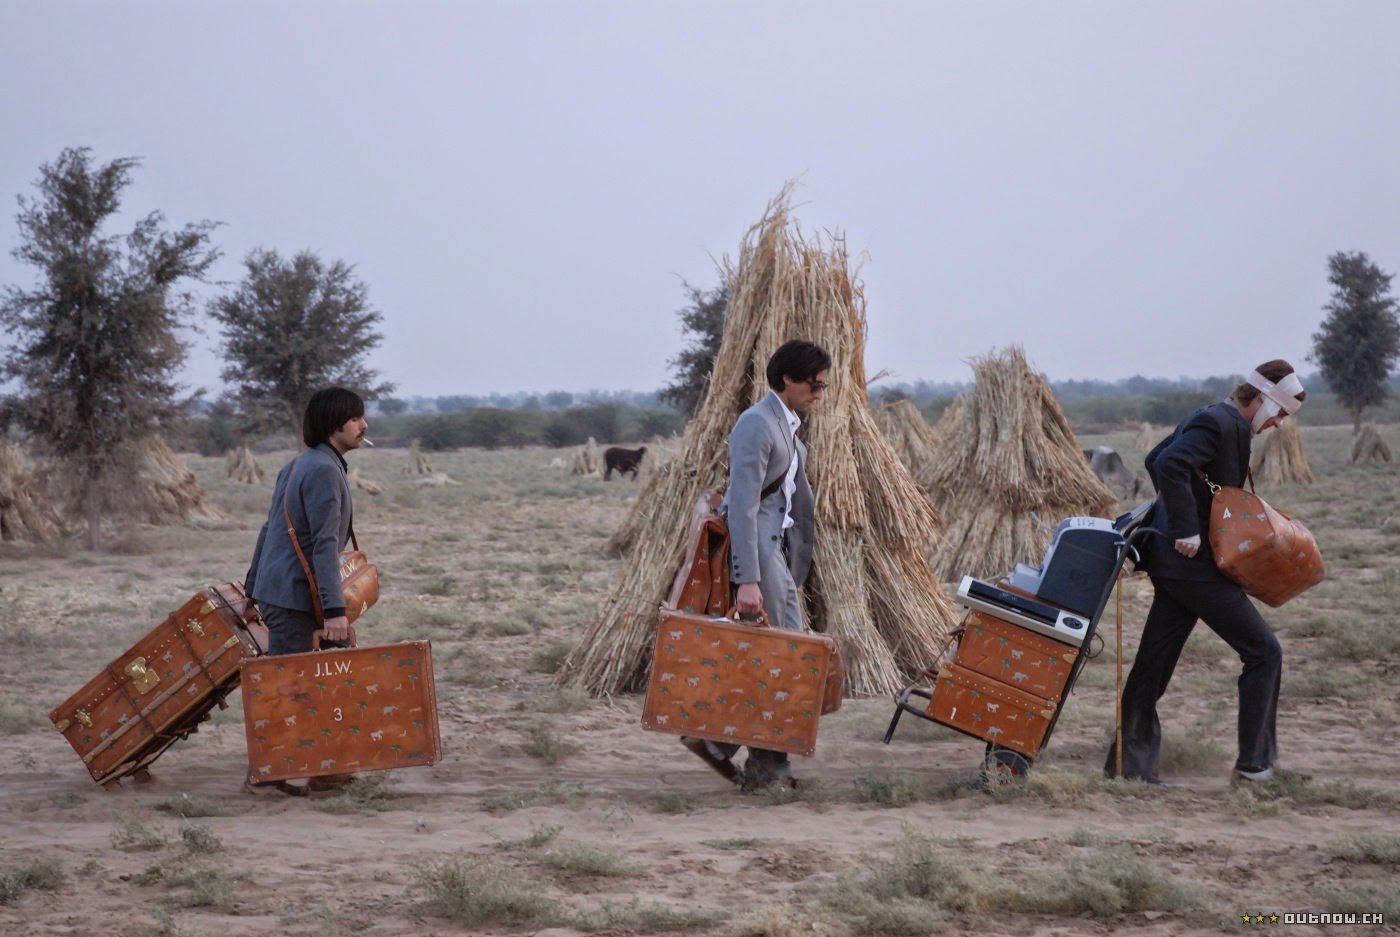 The One Movie Blog: Baggage: Objects and Spaces as Markers of the